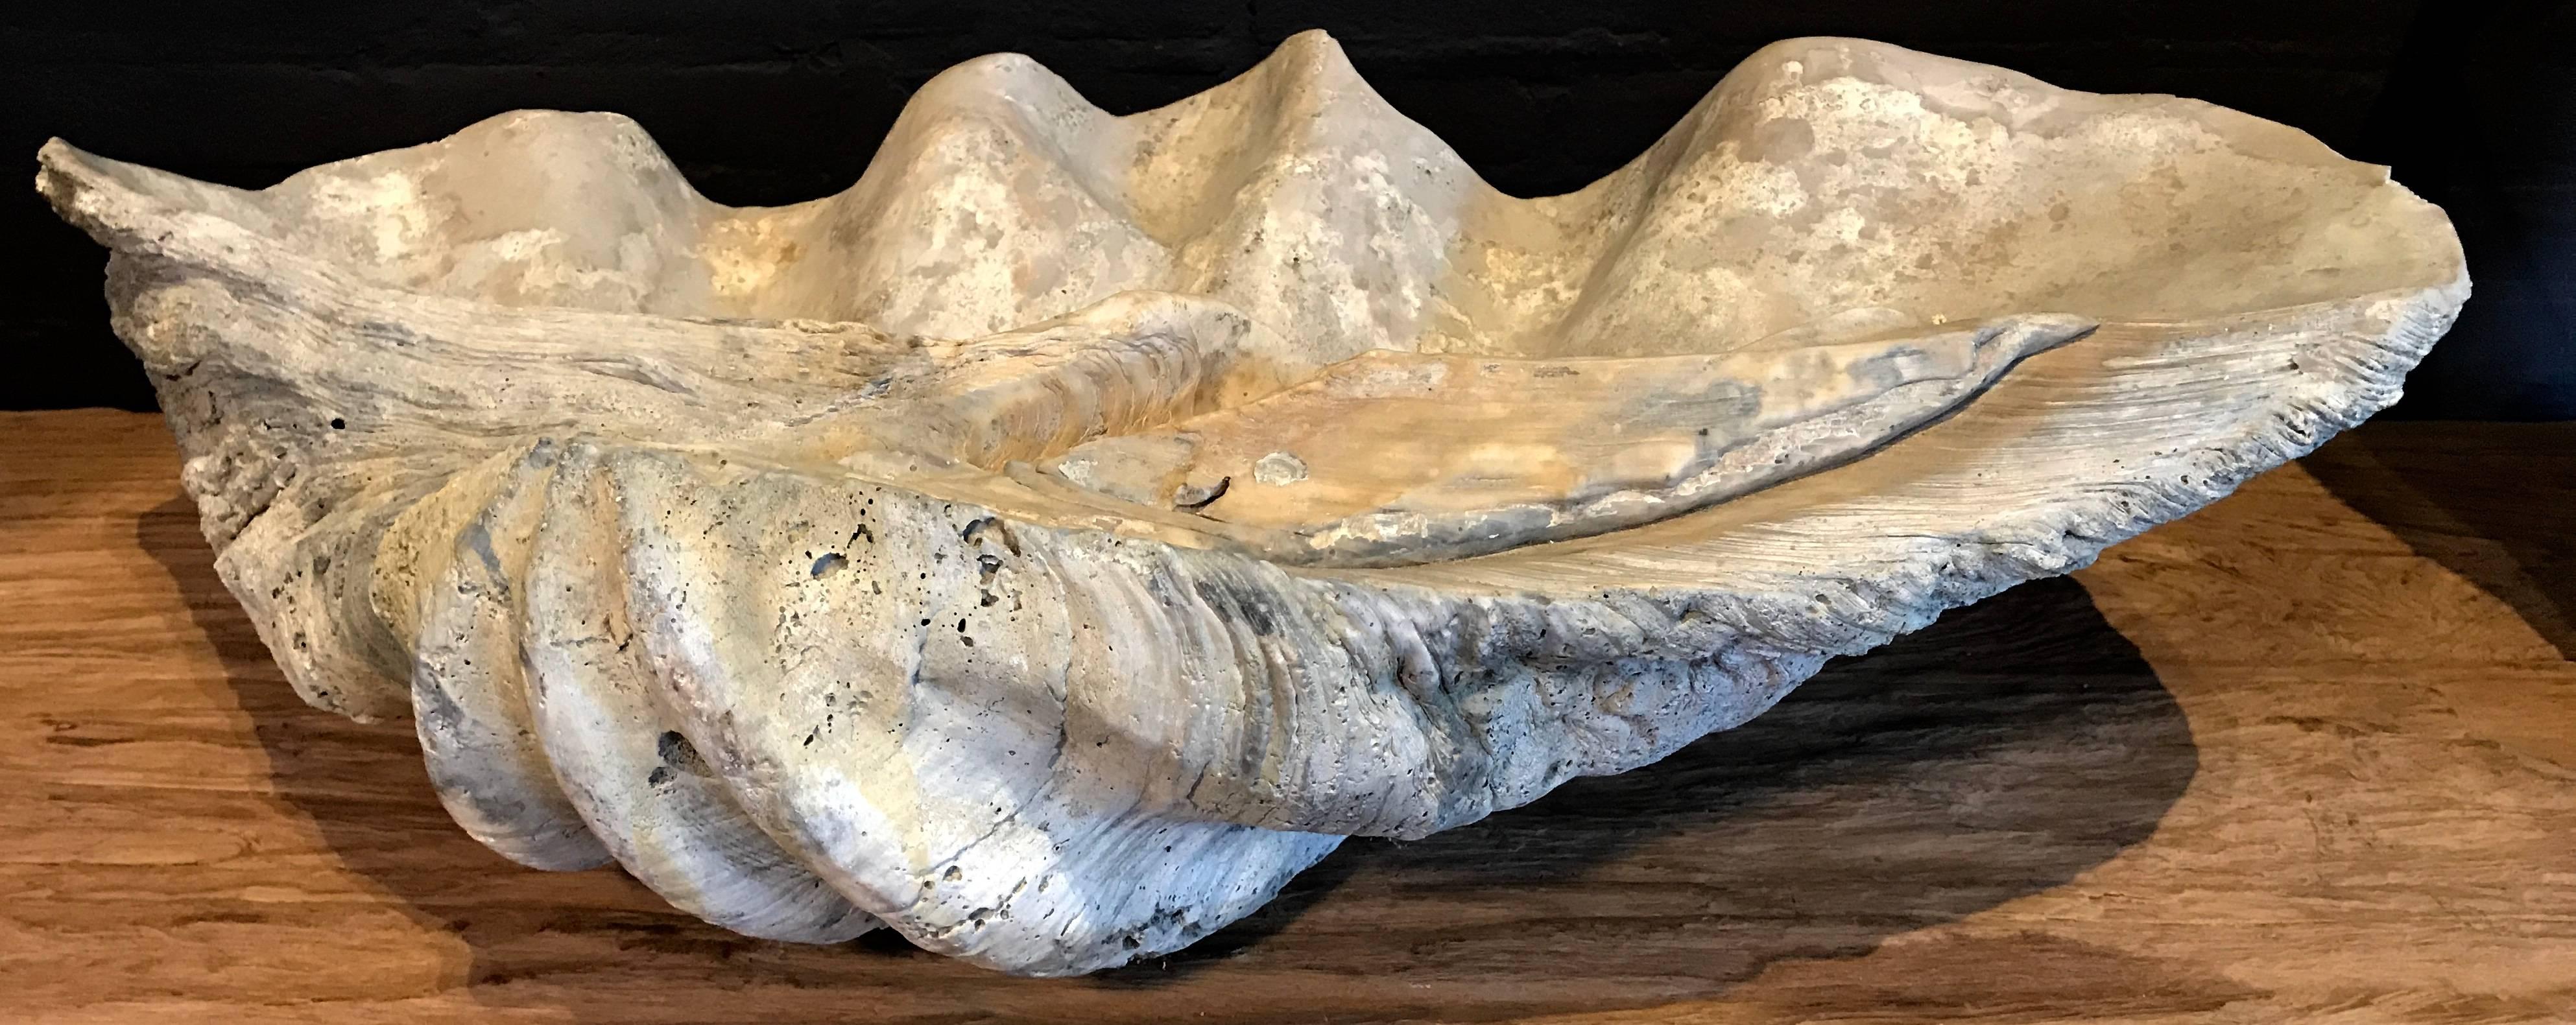 Philippine Giant Clam 'Tridacna Gigas' Fossil 